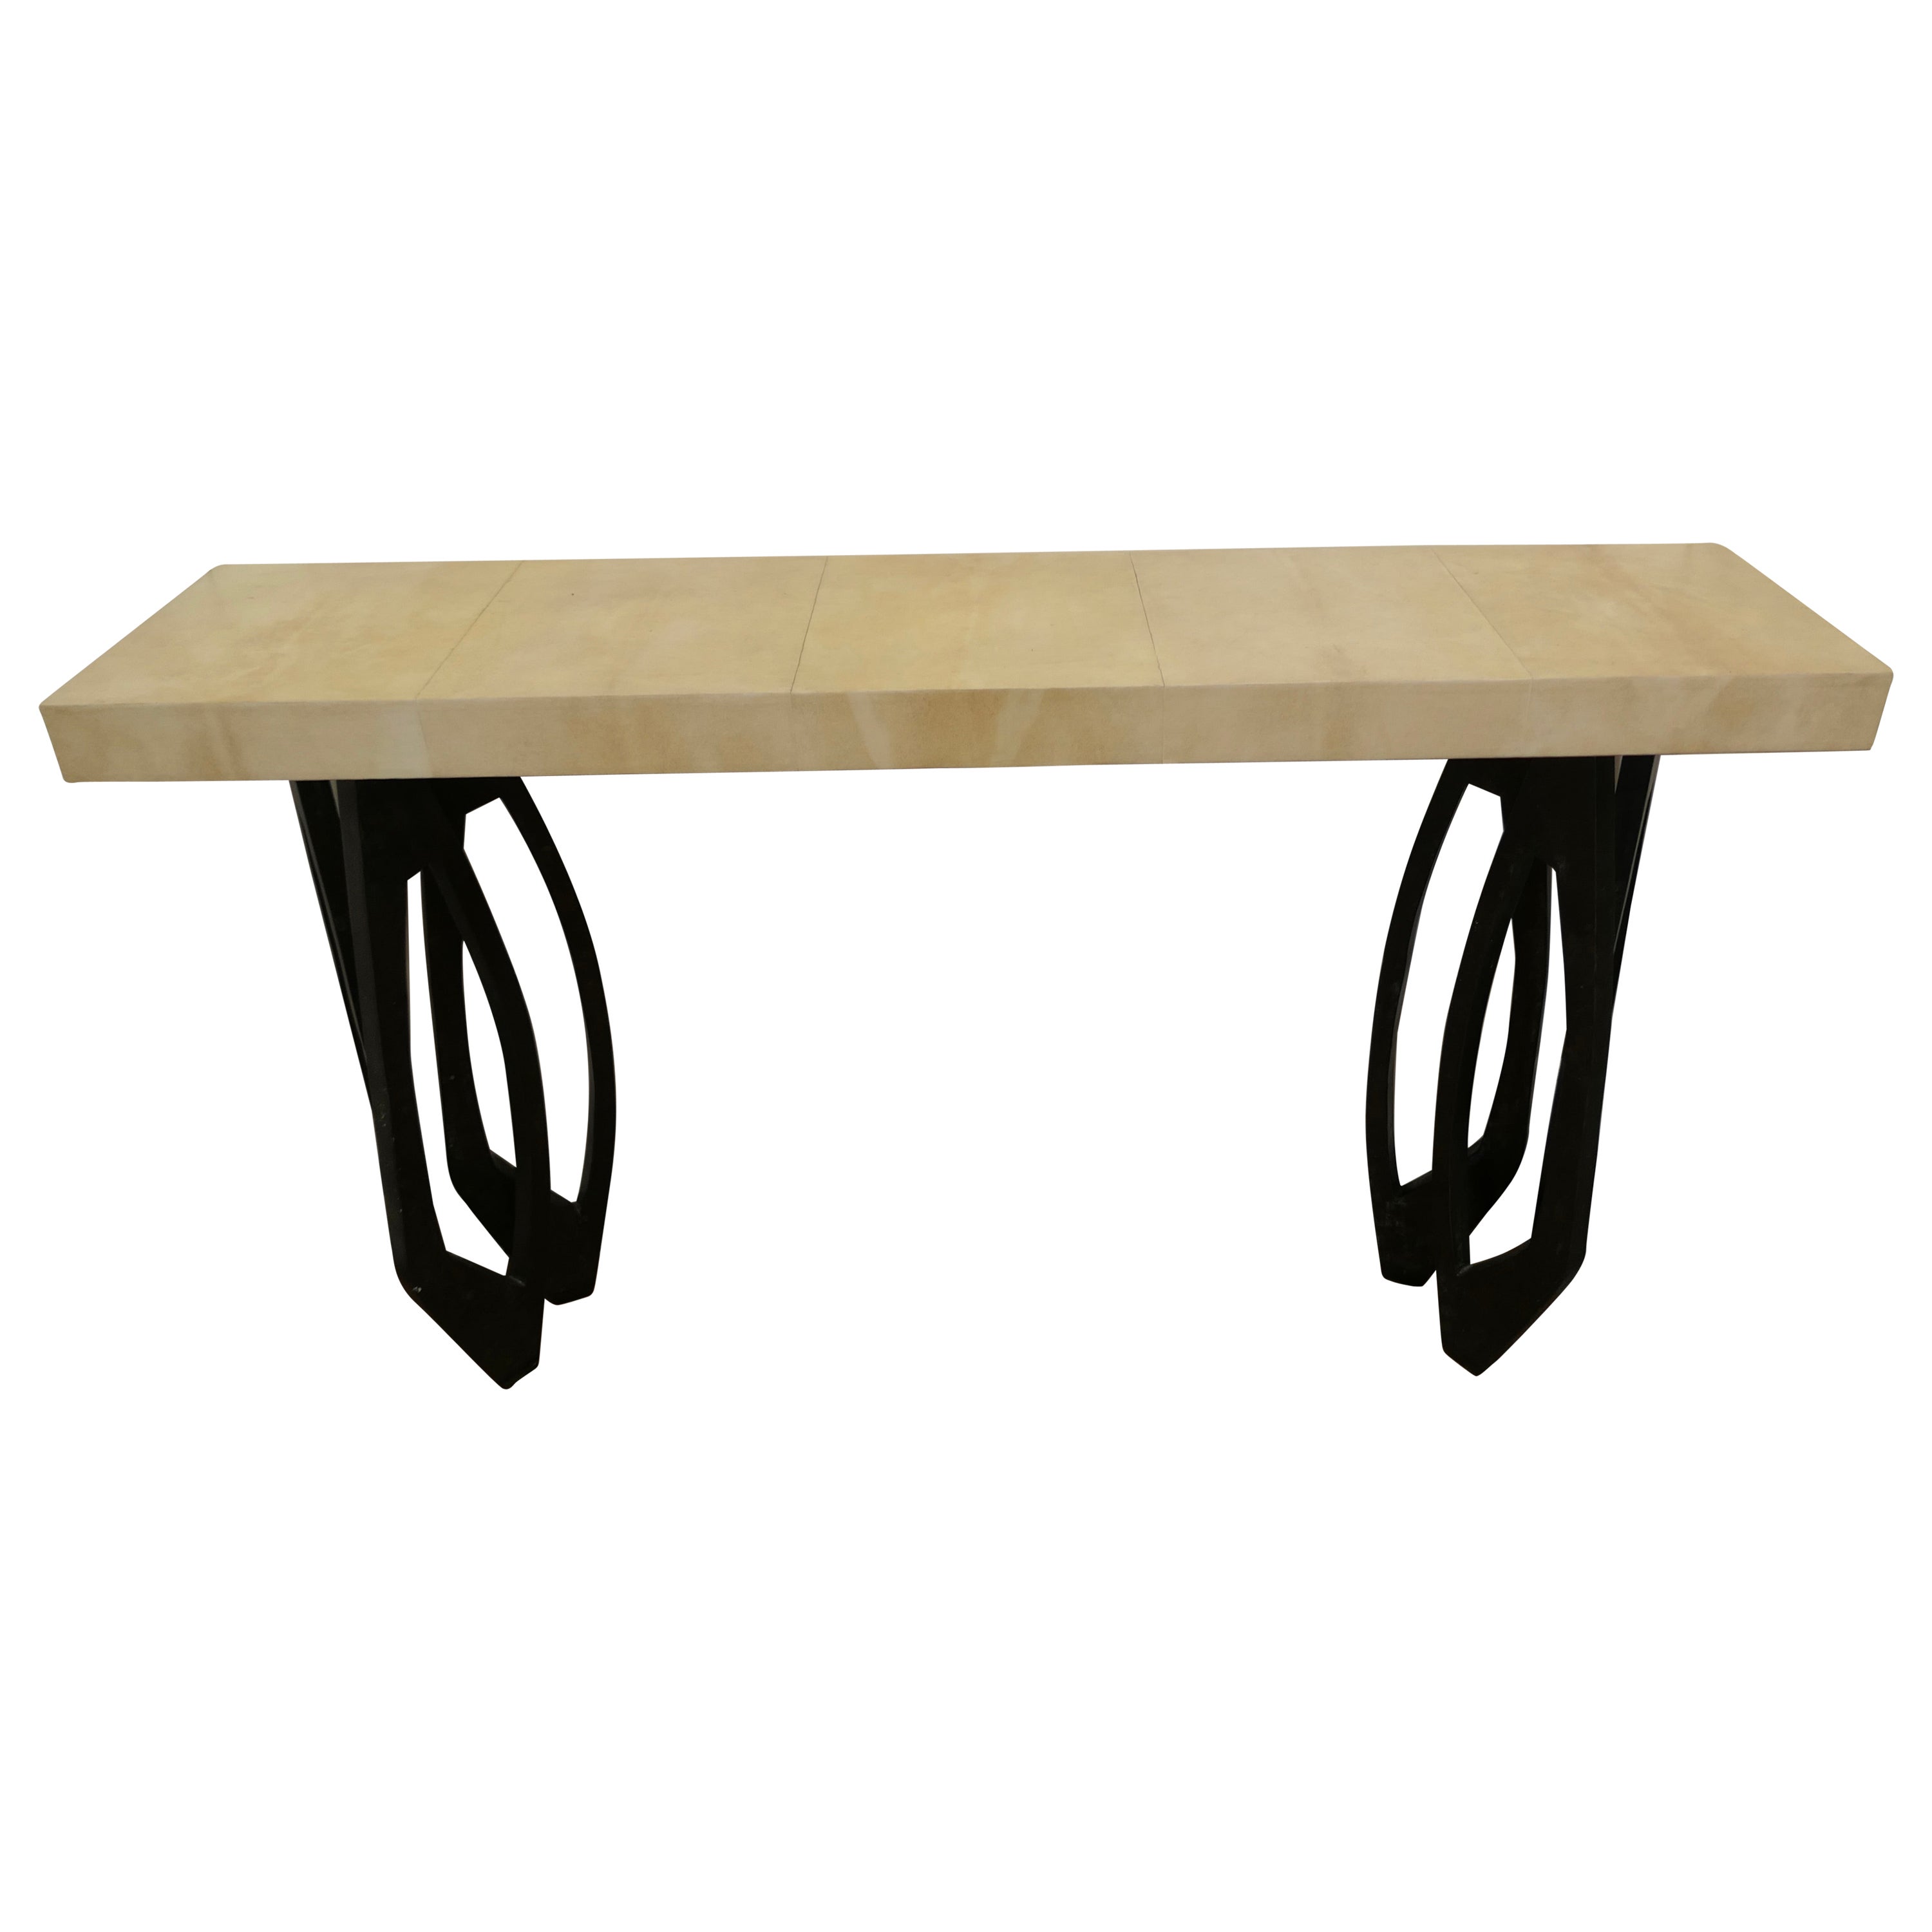 Art Deco Inspired Console Table by R&Y Augousti Design the Table Is a Handmade For Sale